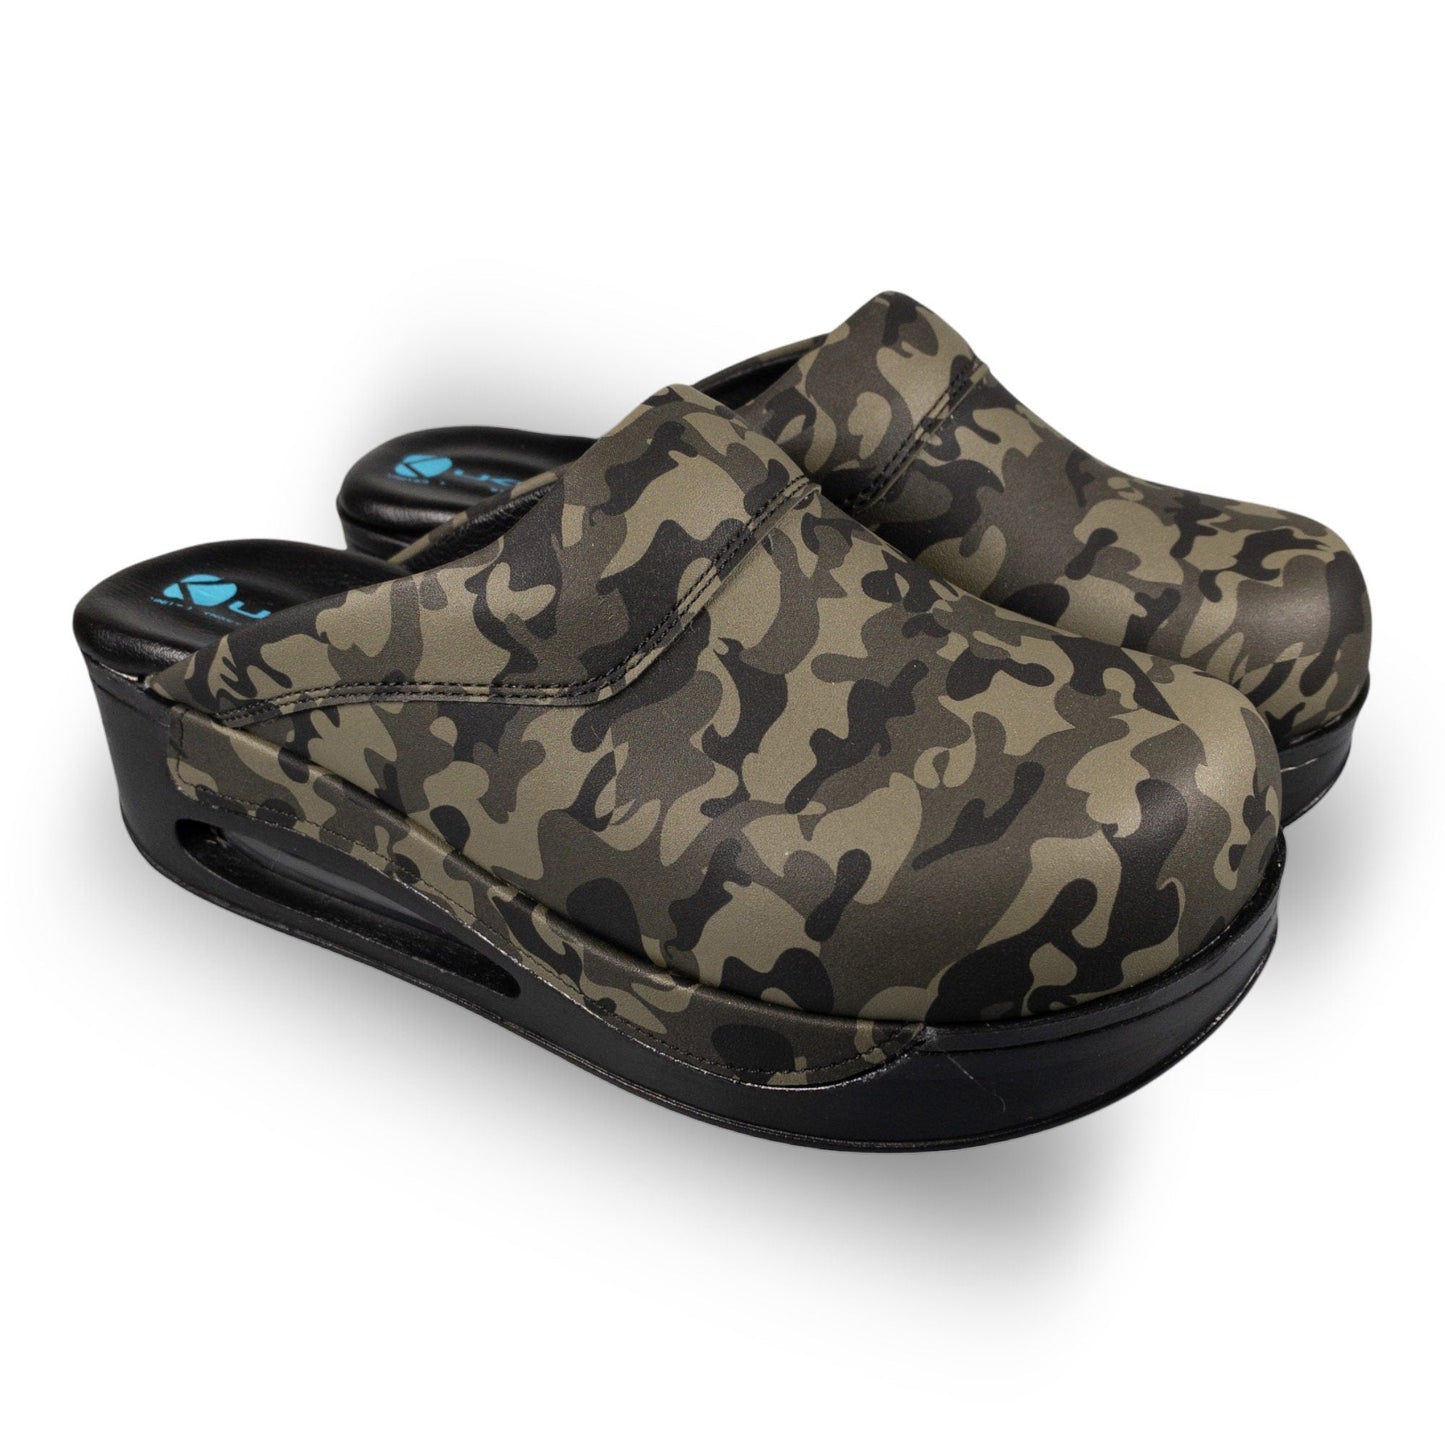 Camouflage Black Sole Air Clogx Leather Slippers, Clogs